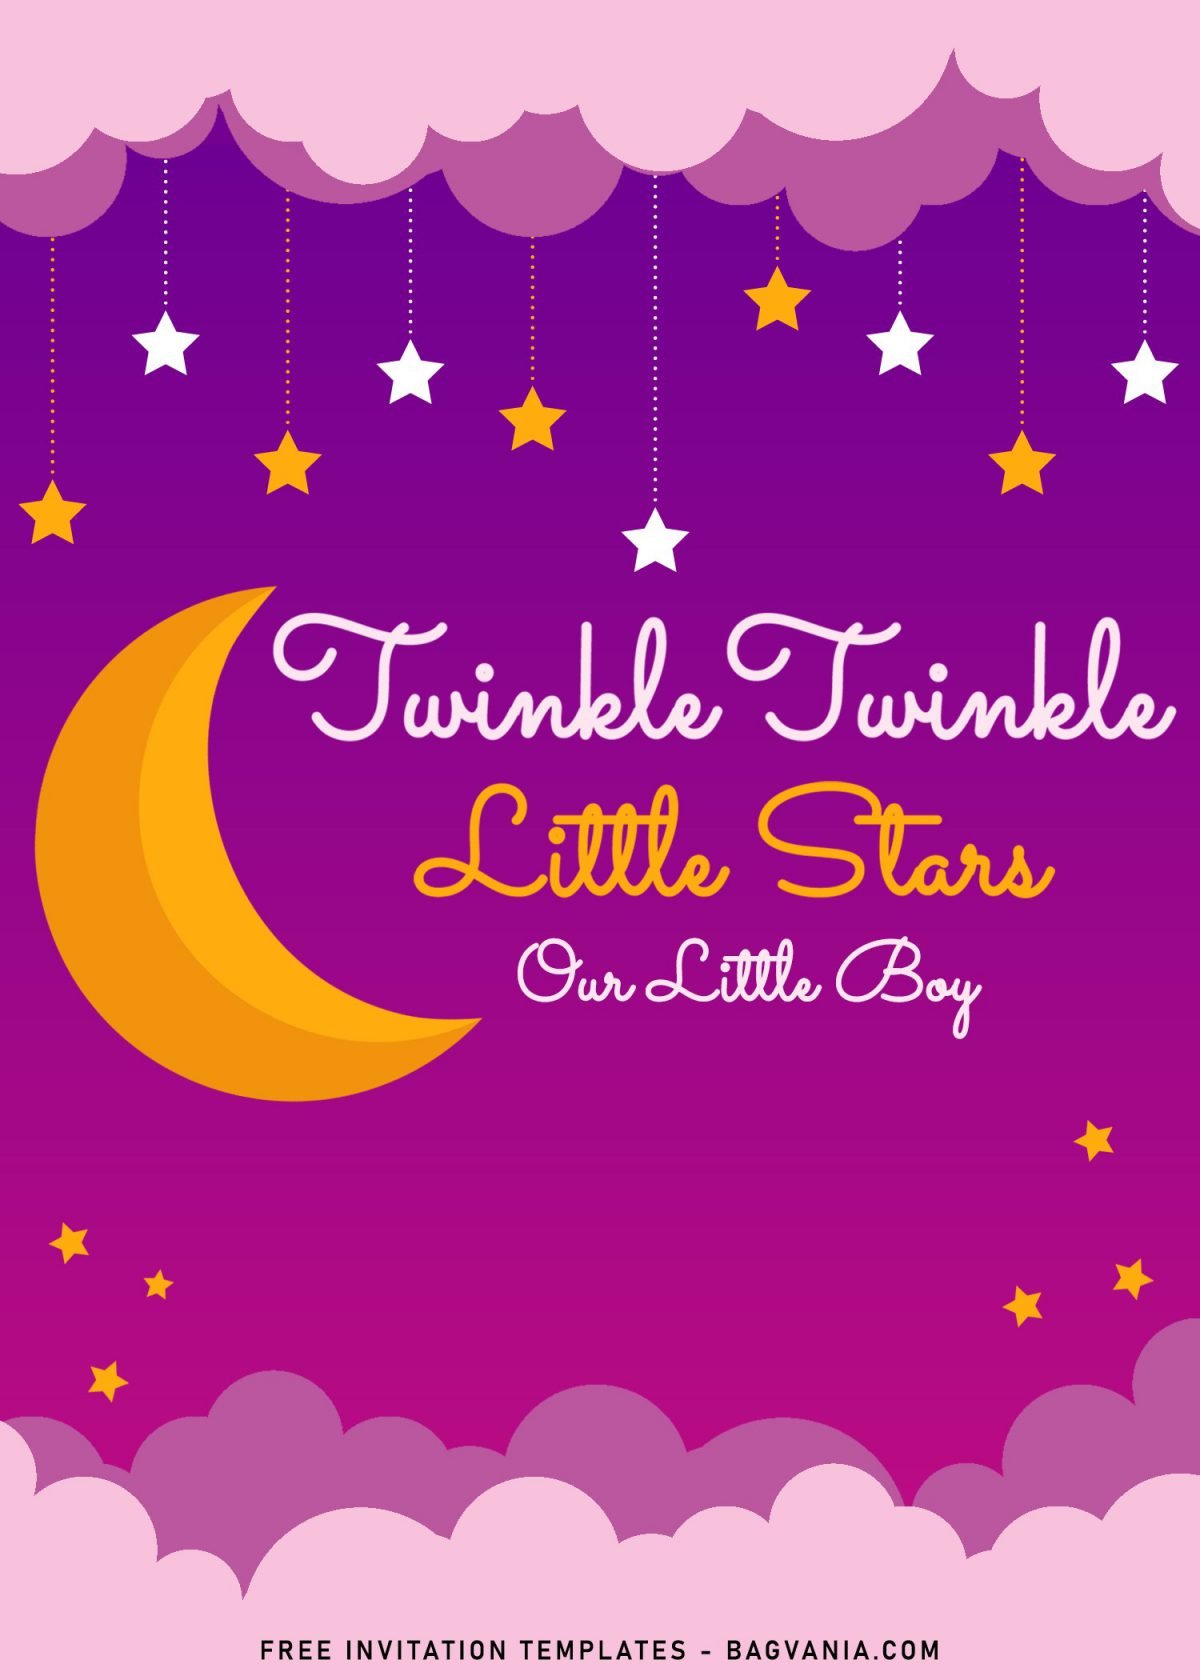 10+ Twinkle Twinkle Little Star Birthday Invitation Templates and has Moon